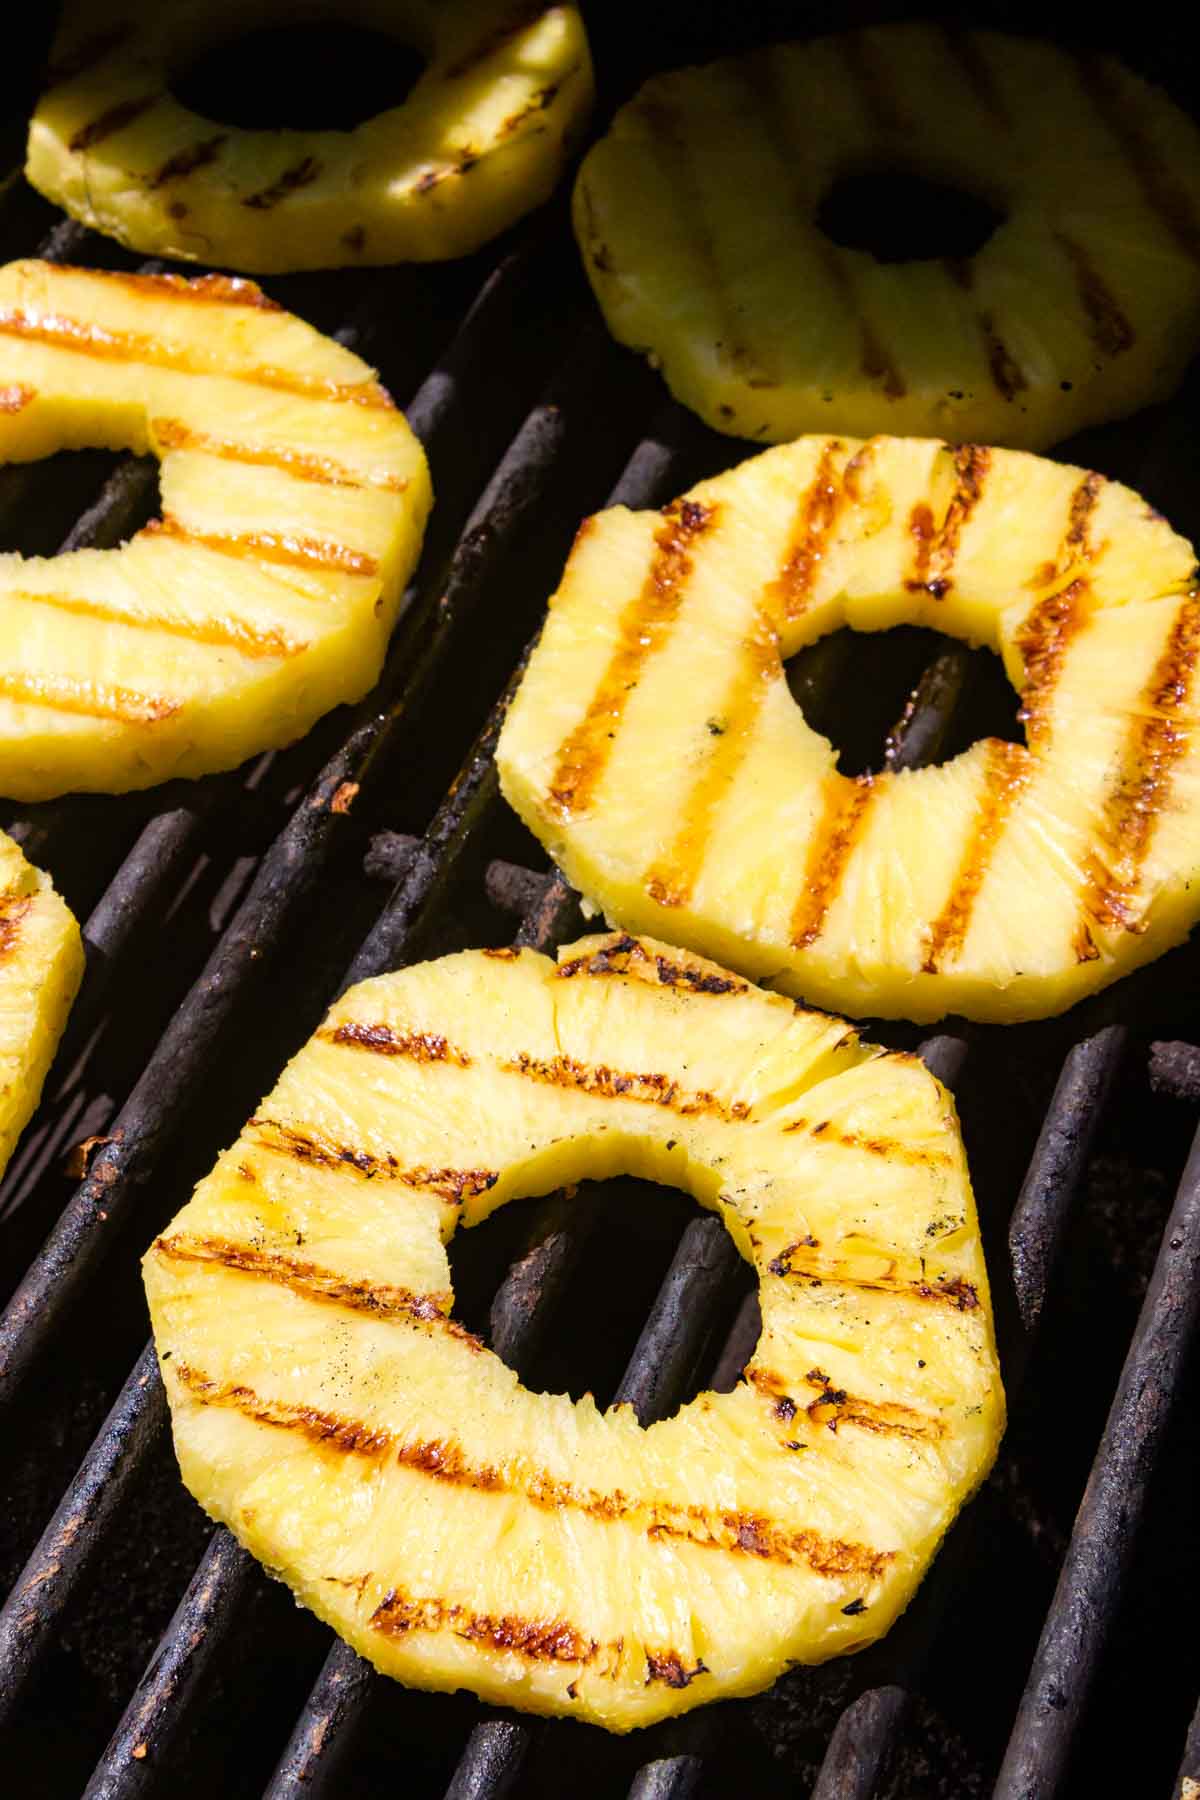 Pineapple slices cook on a grill.